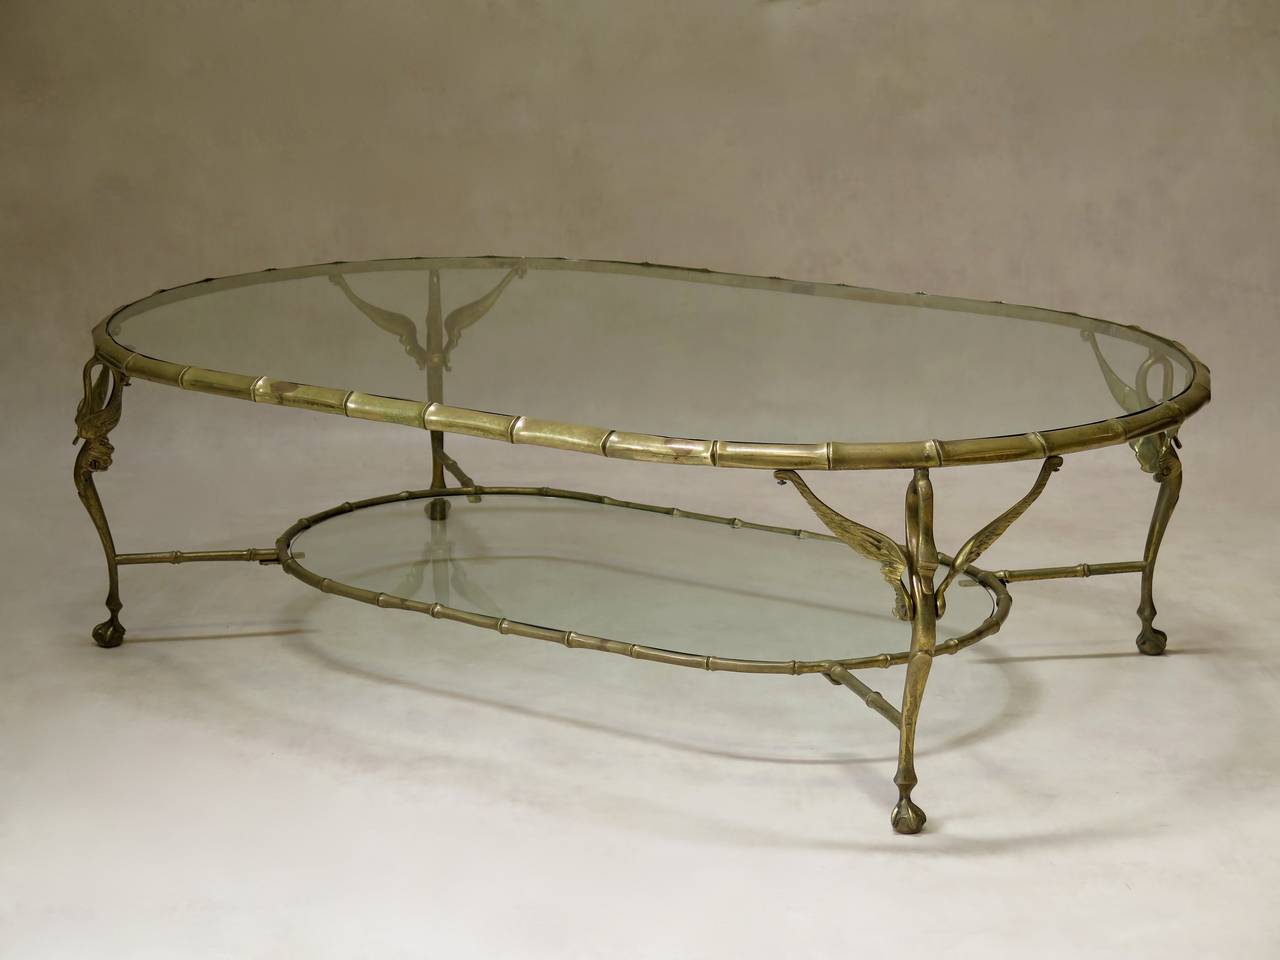 Chic set of five solid brass coffee tables with glass tops. Decorated with elegant swan heads at the top of each leg and ending in claw and ball feet. The glass tops are set inside faux-bamboo surrounds.
One table is a large oblong shape with a